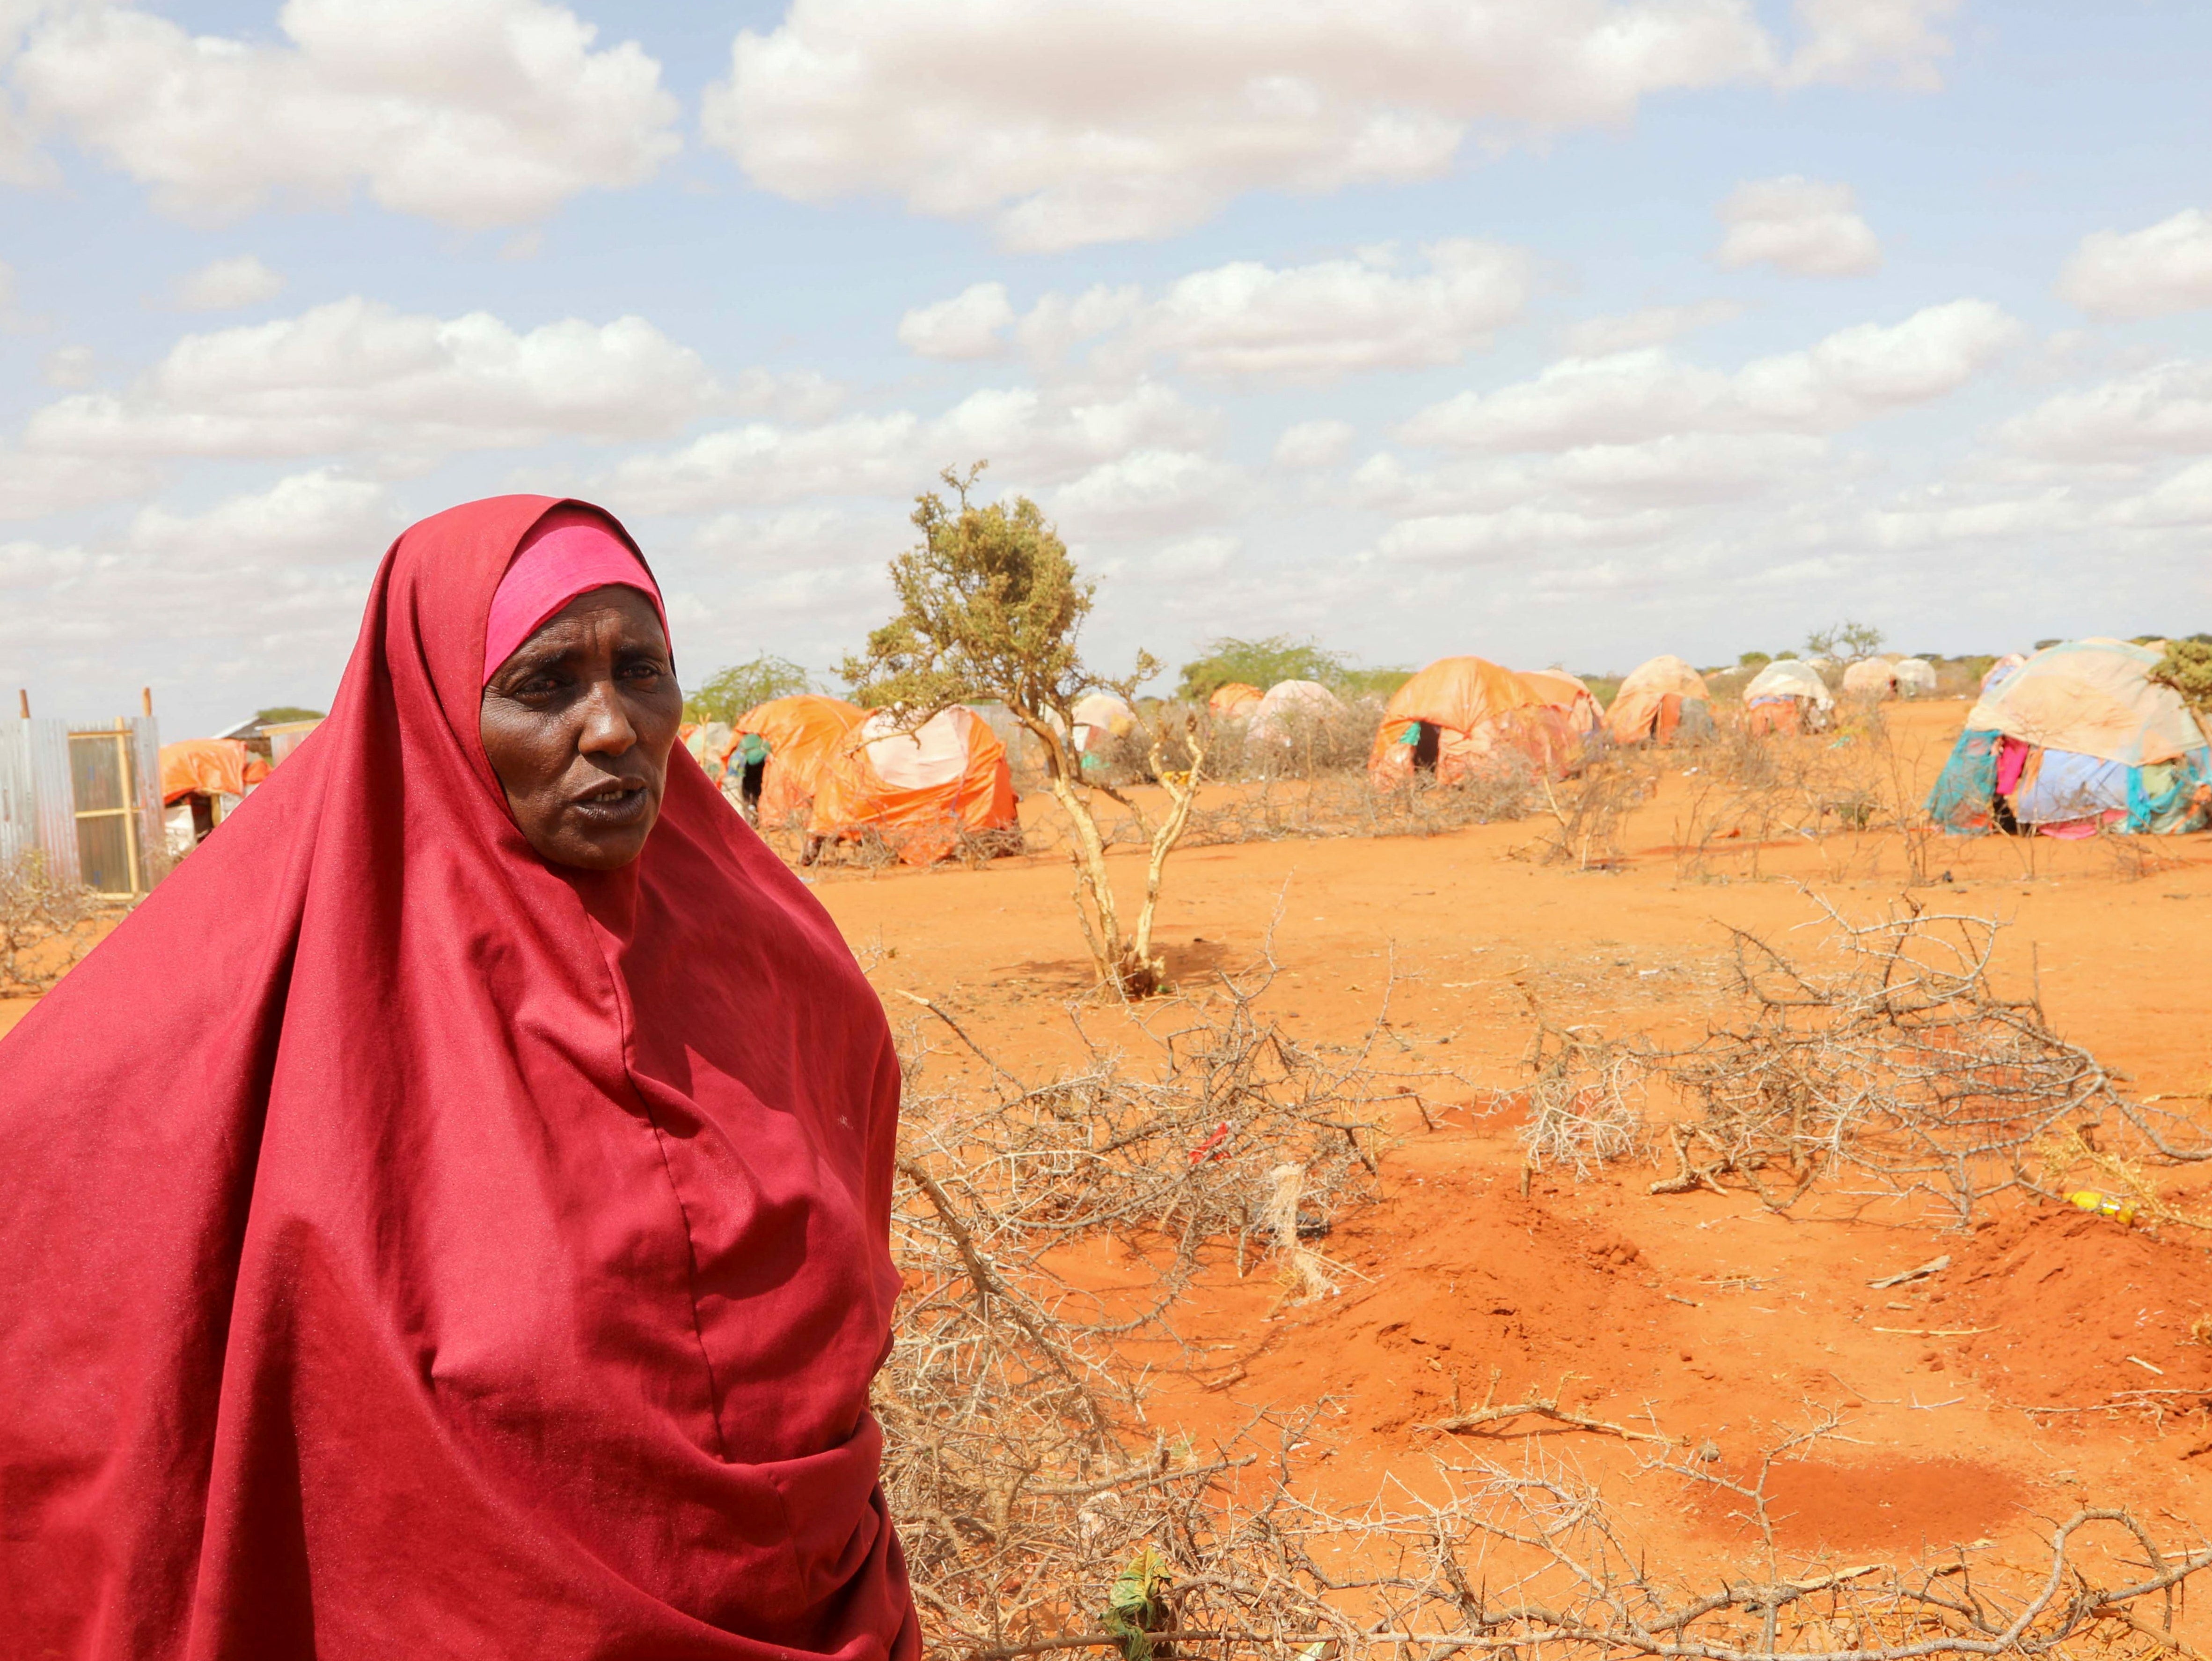 Halima Hassan Abdullahi stands near the graves of her twin granddaughters Ebla and Abdia